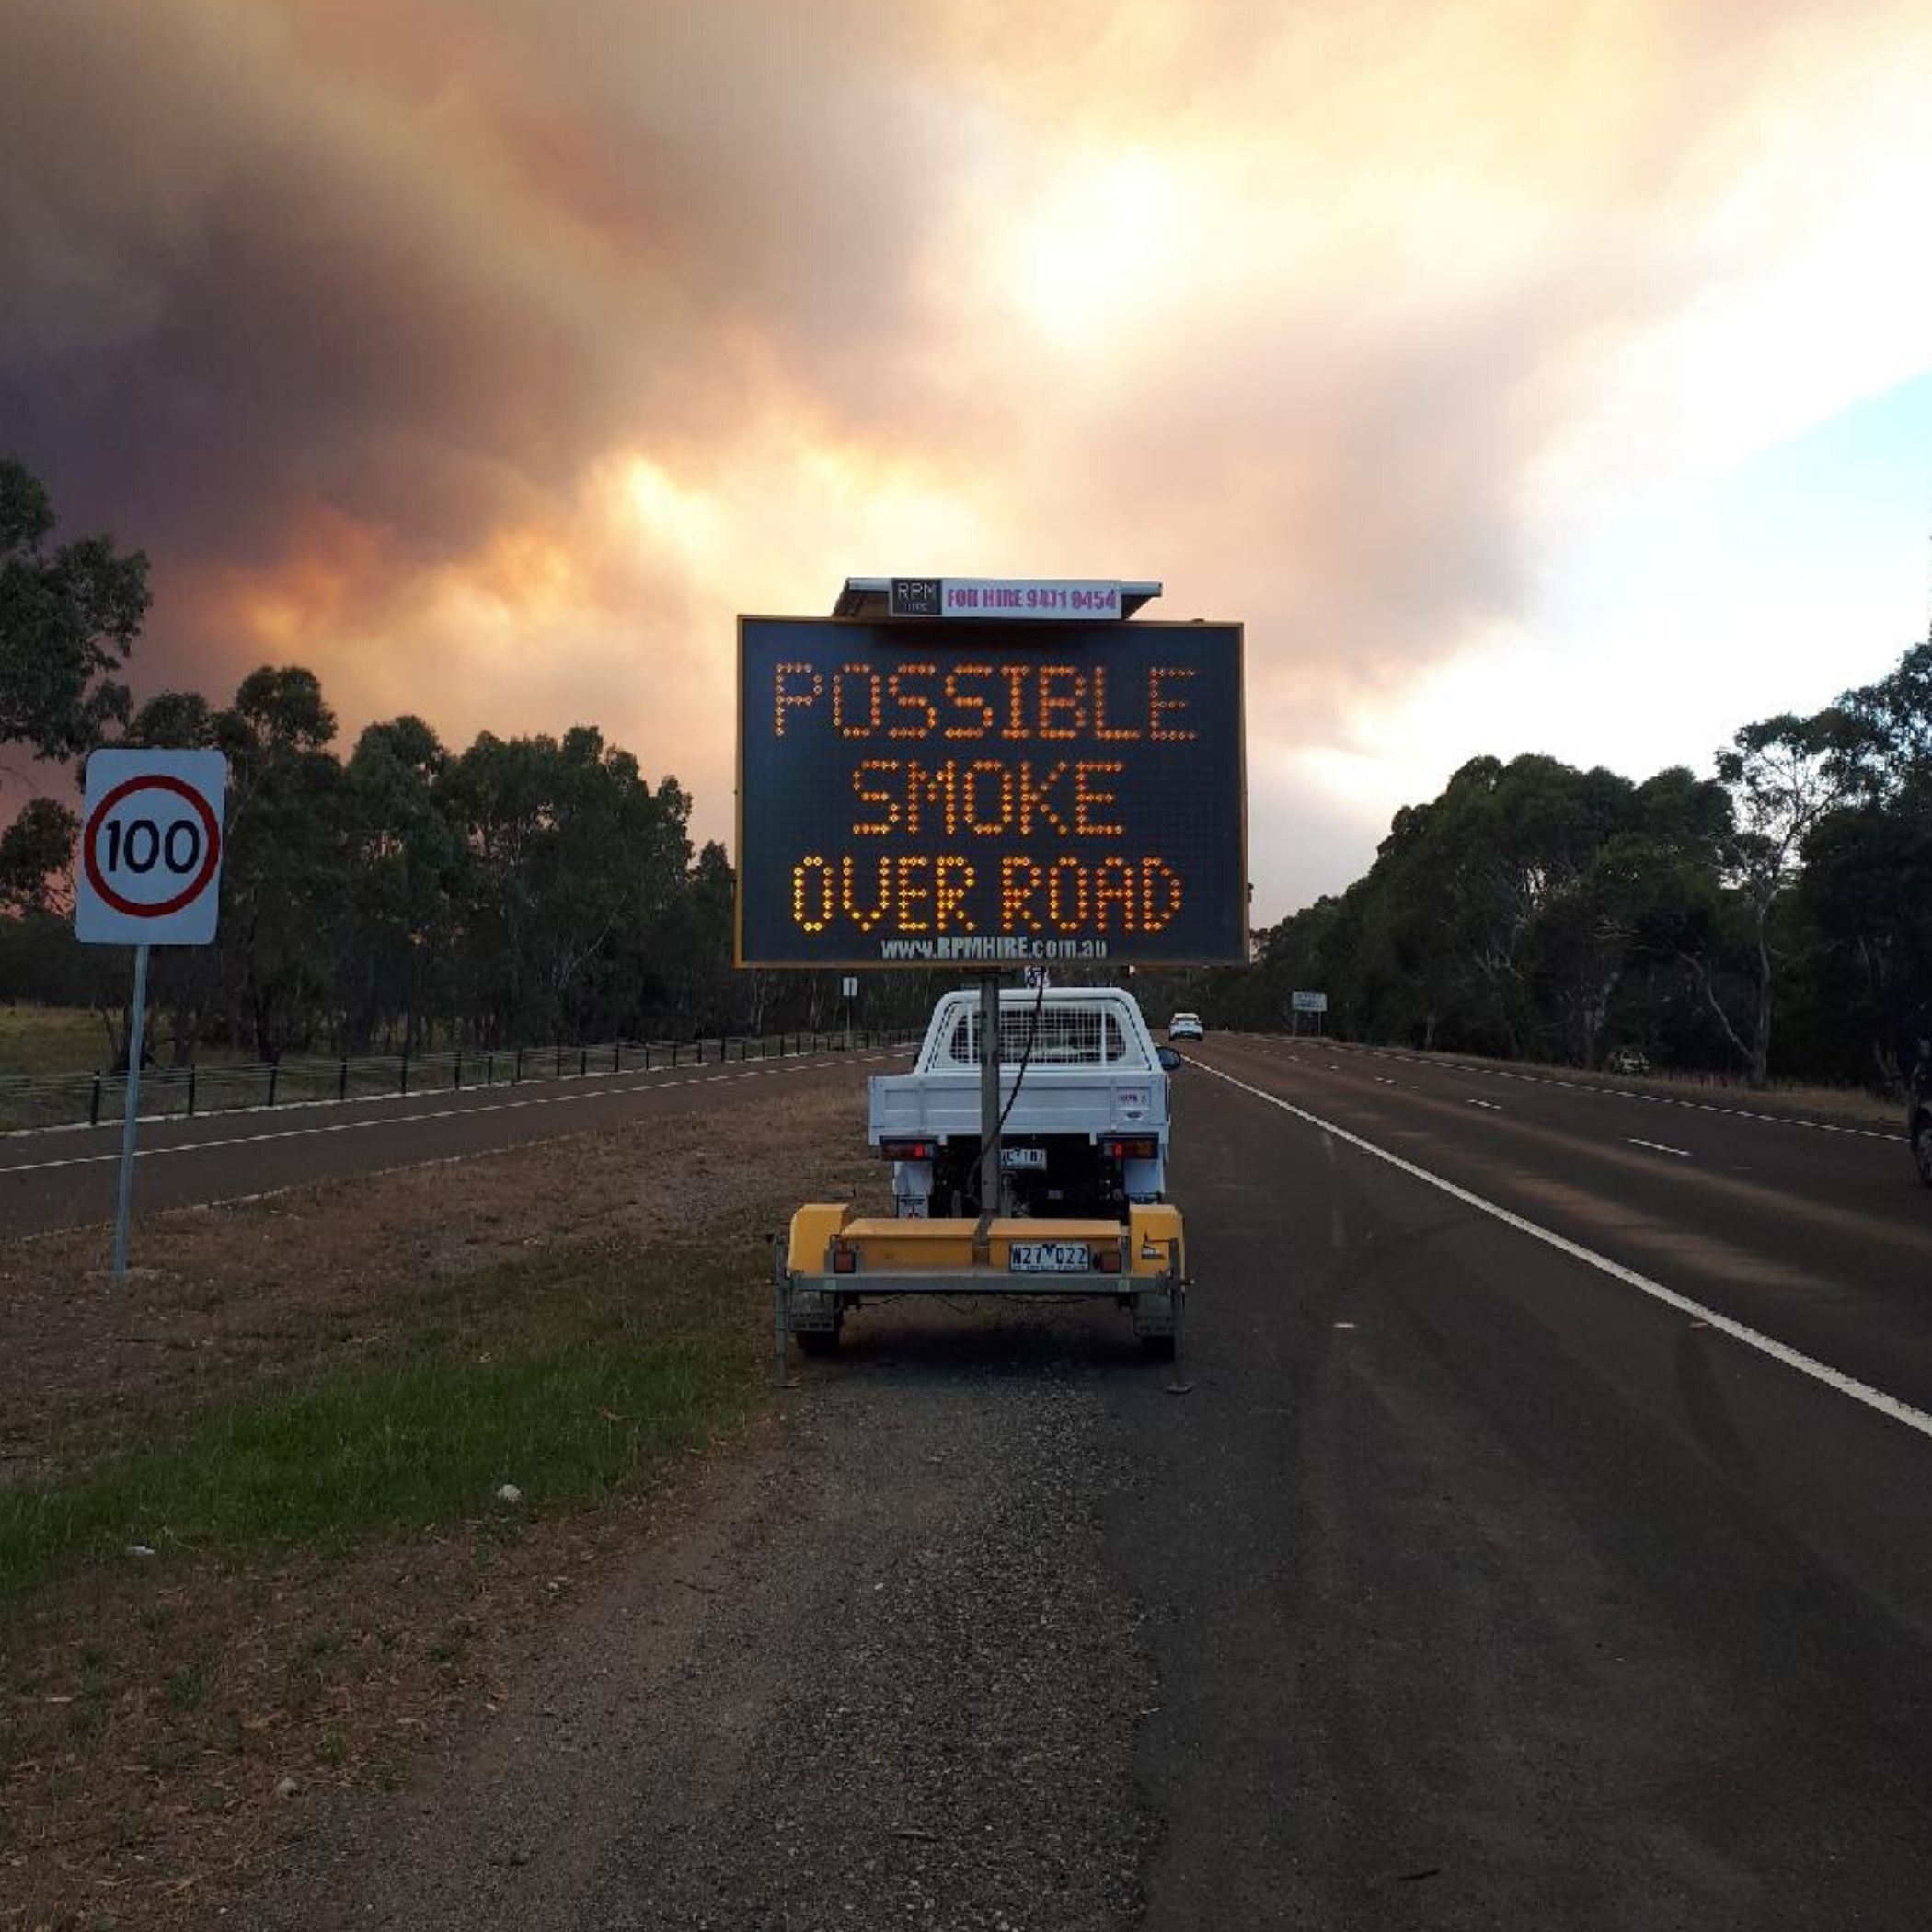 Variable Message Signs Smoke Over Road